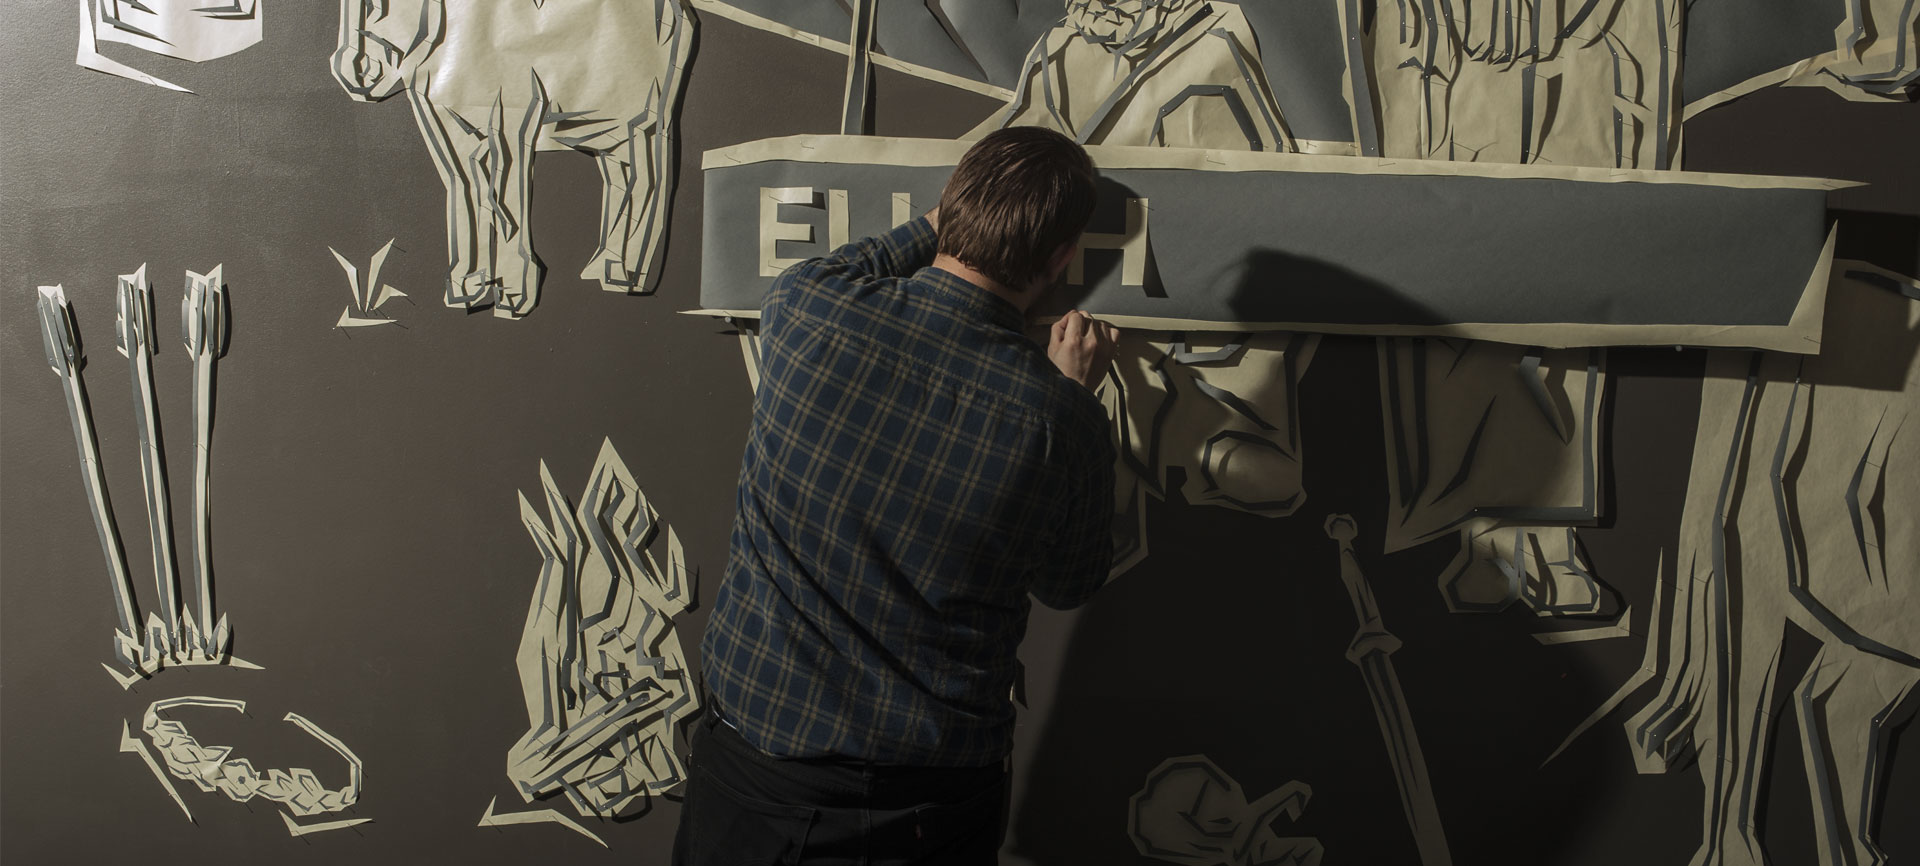 Photo of Will Truran installing a large cut paper mural